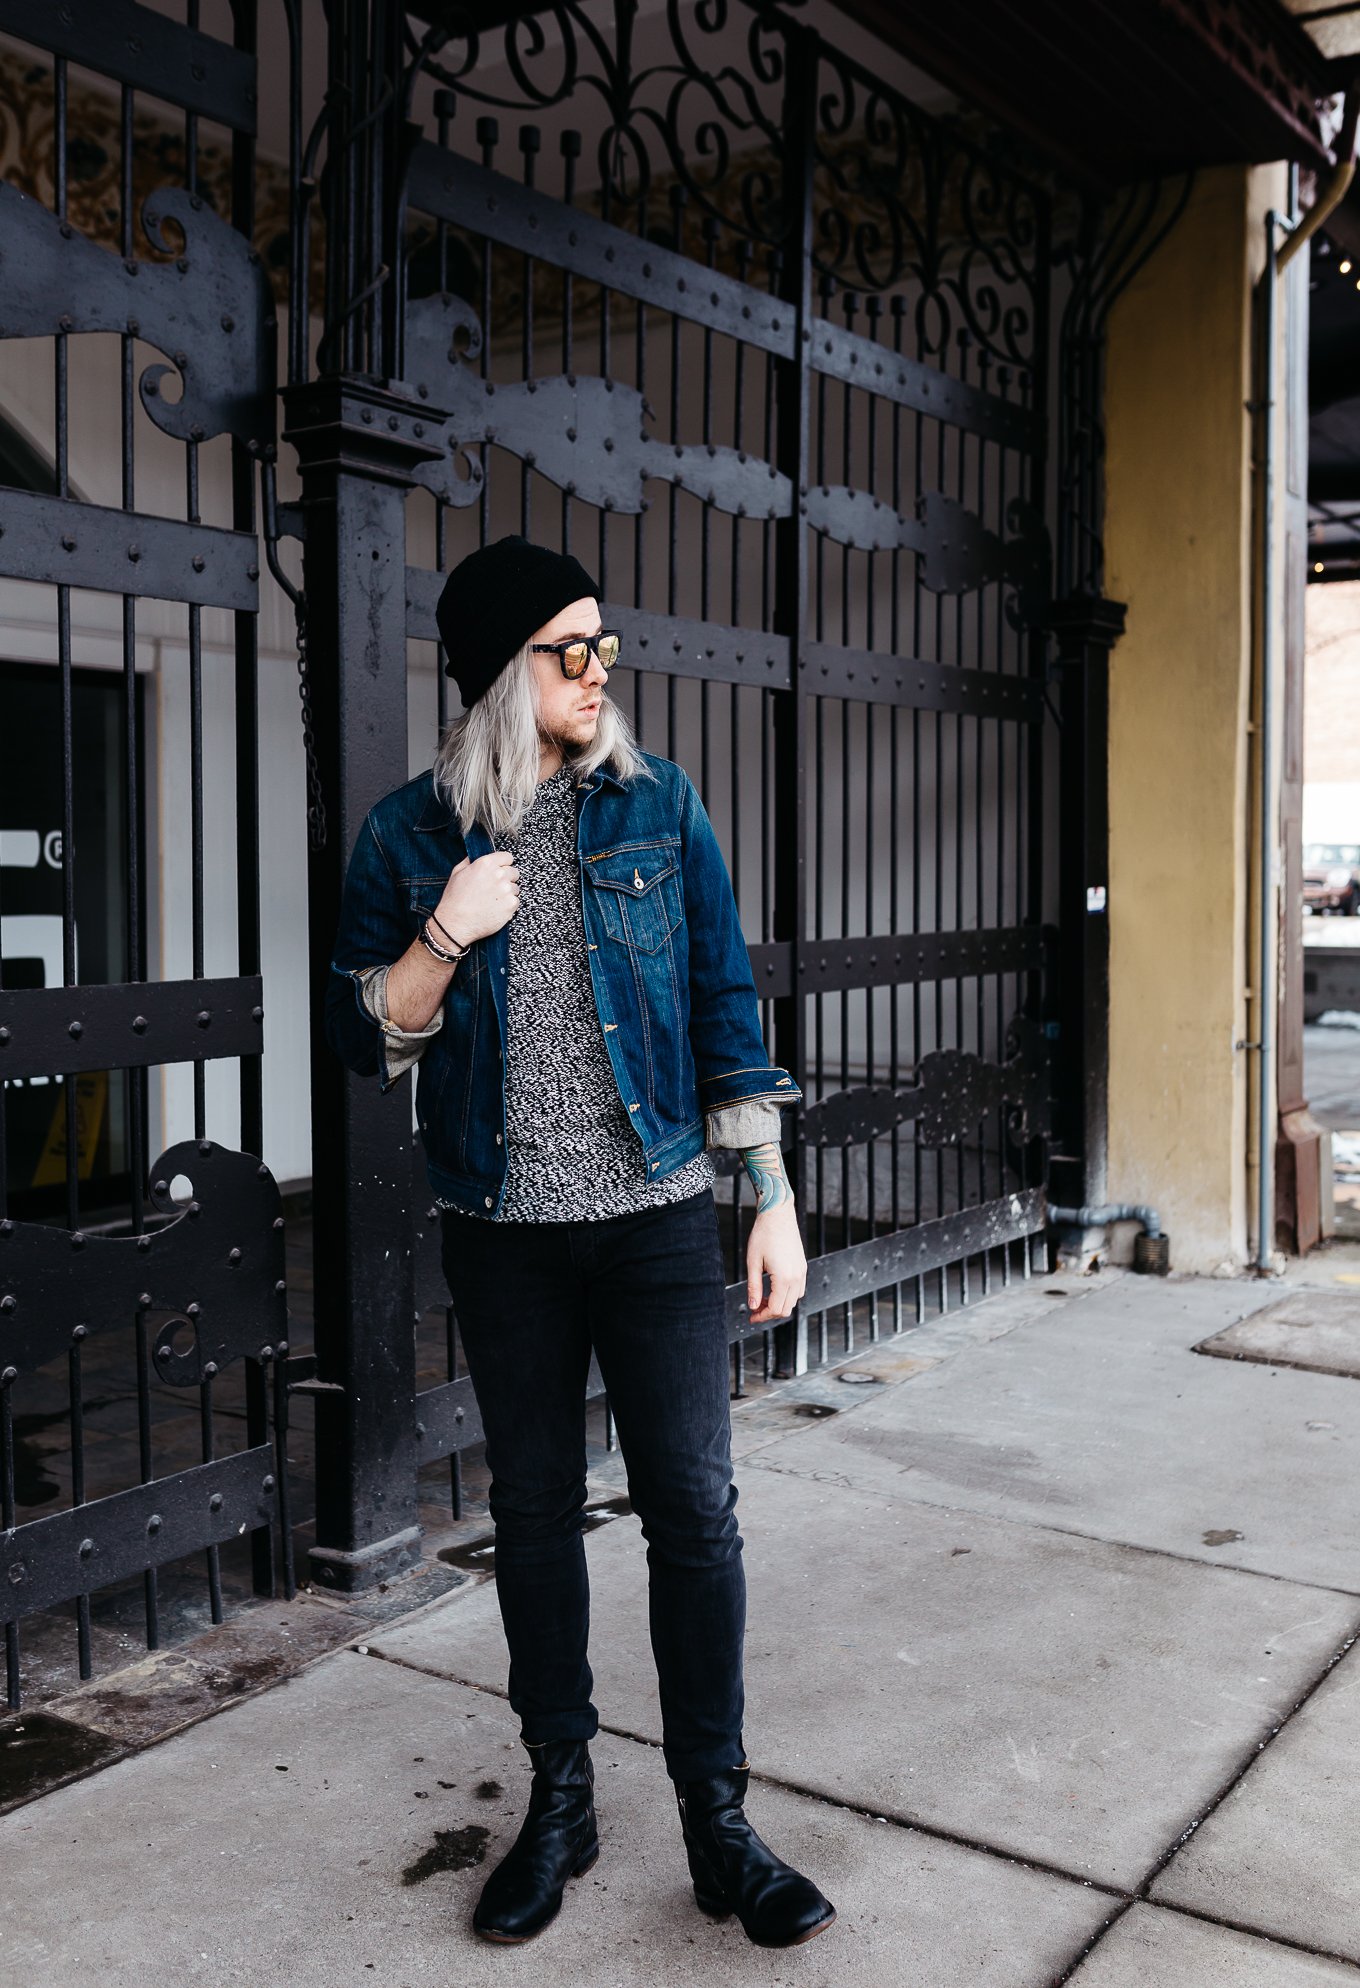 mens fashion blogger, mens denim jacket, how to wear denim jacket, how to dress for winter in a denim jacket, mens style blogger